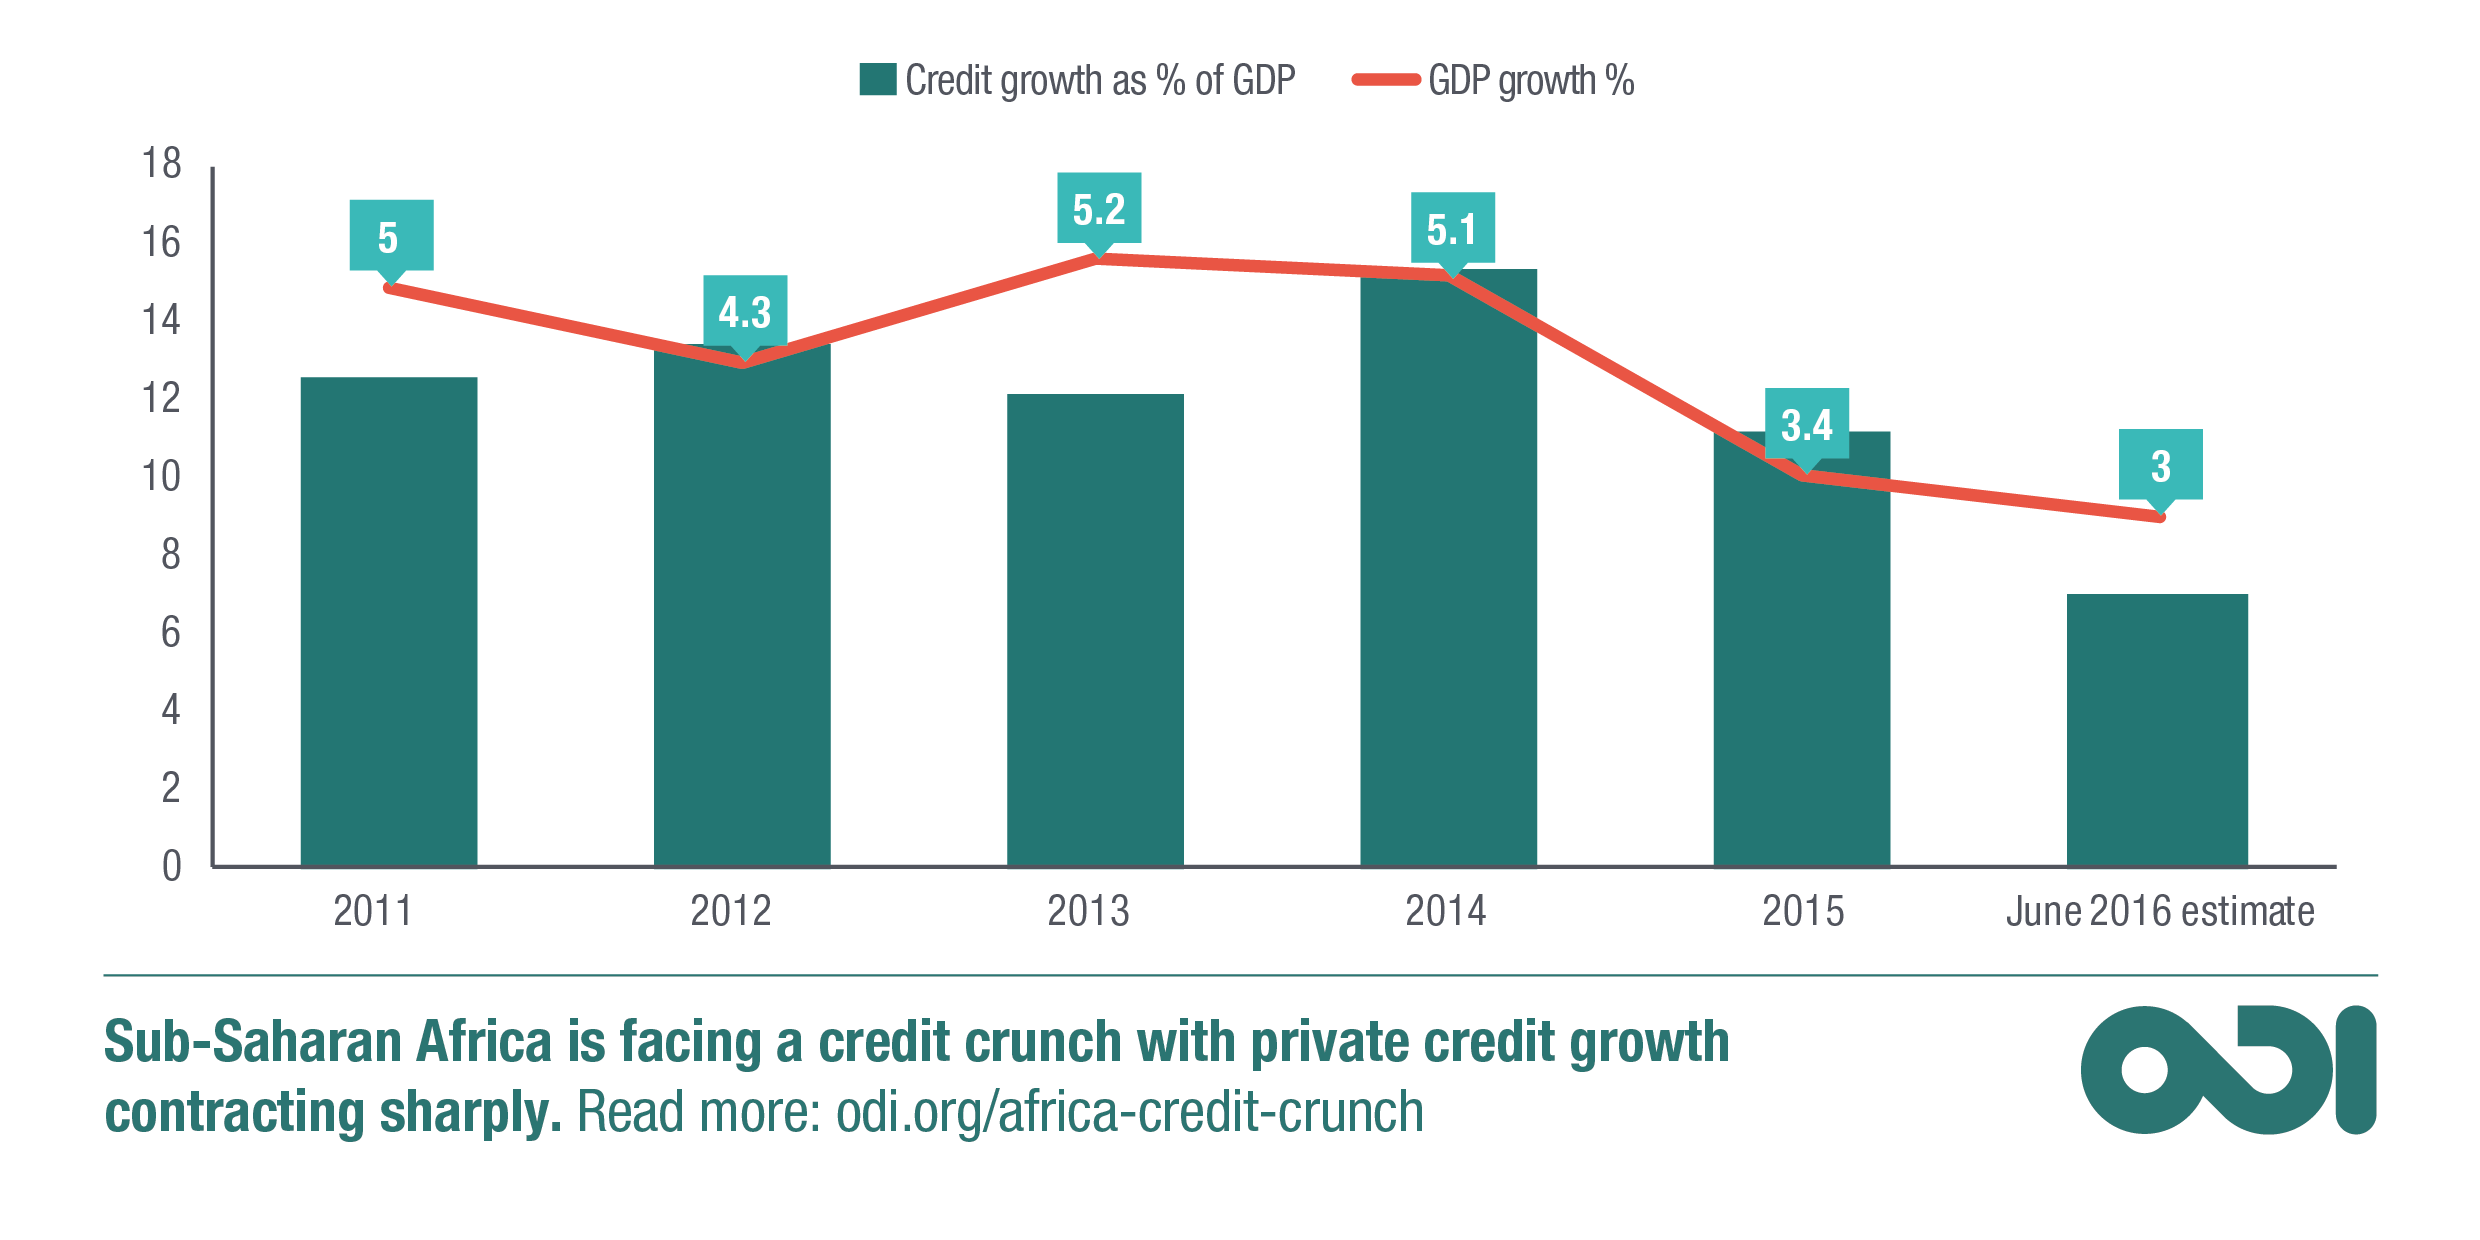 Infographic: Africa facing credit crunch, with private sector growth contracting sharply